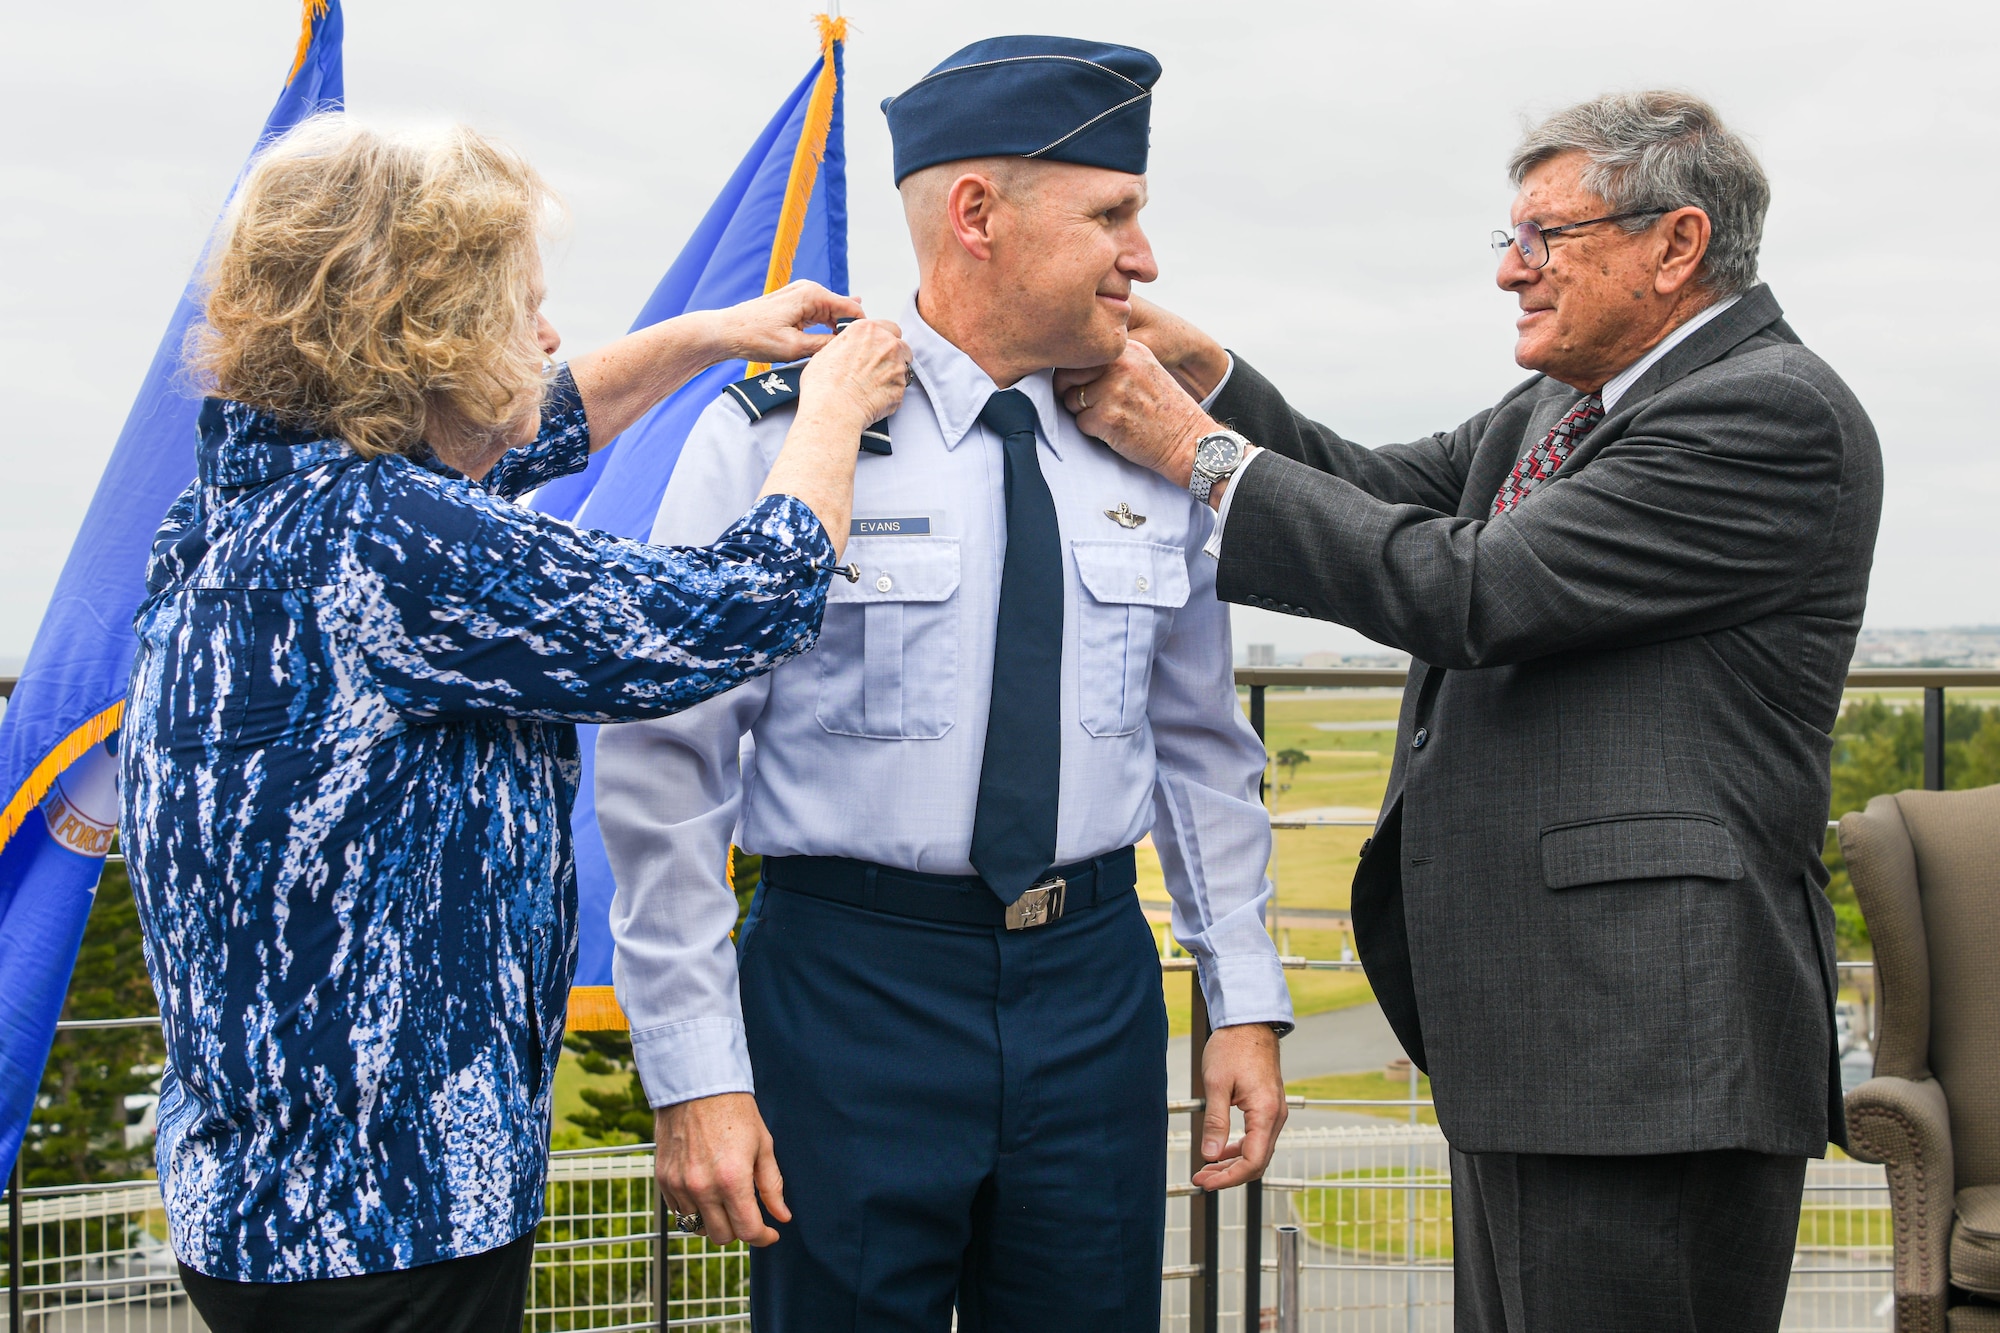 U.S. Air Force Brig. Gen. Nicholas Evans, center, 18th Wing commander, has his epaulets exchanged by his mother, Dorthy Evans, left, and his father, Jack Evans, right, during a promotion ceremony.